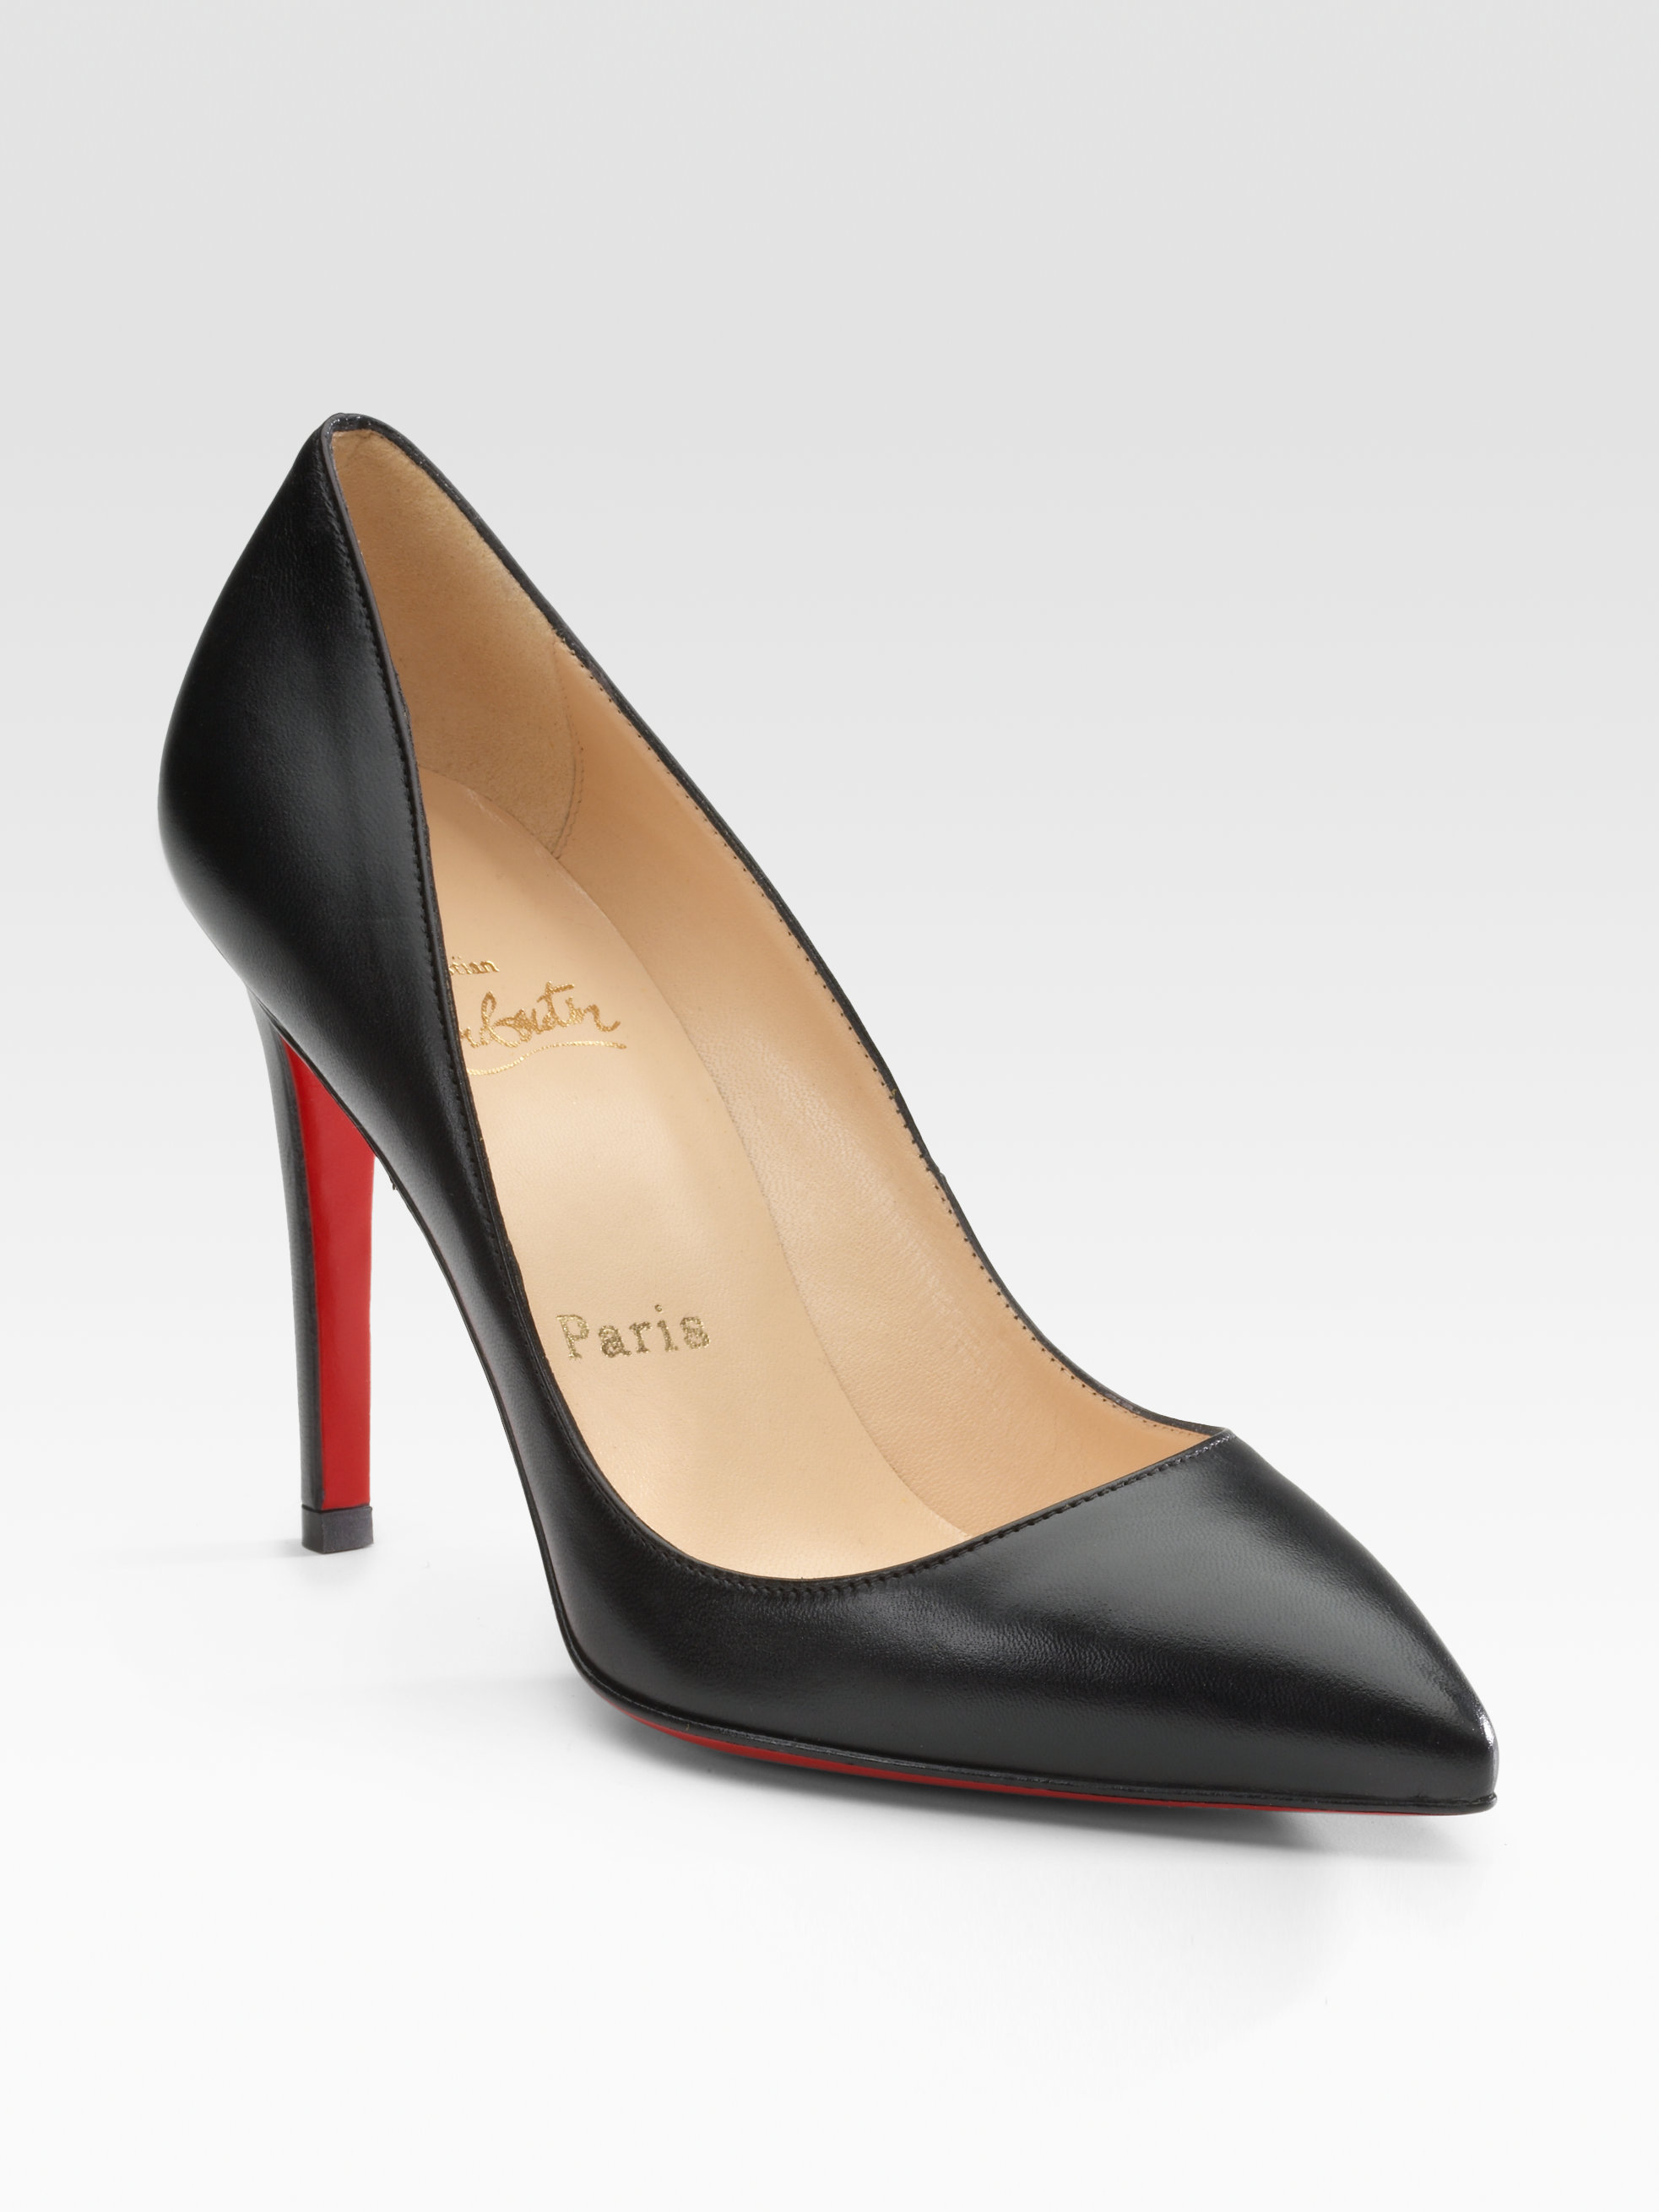 Christian Louboutin Pigalle 100 Leather Pumps in Black - Lyst